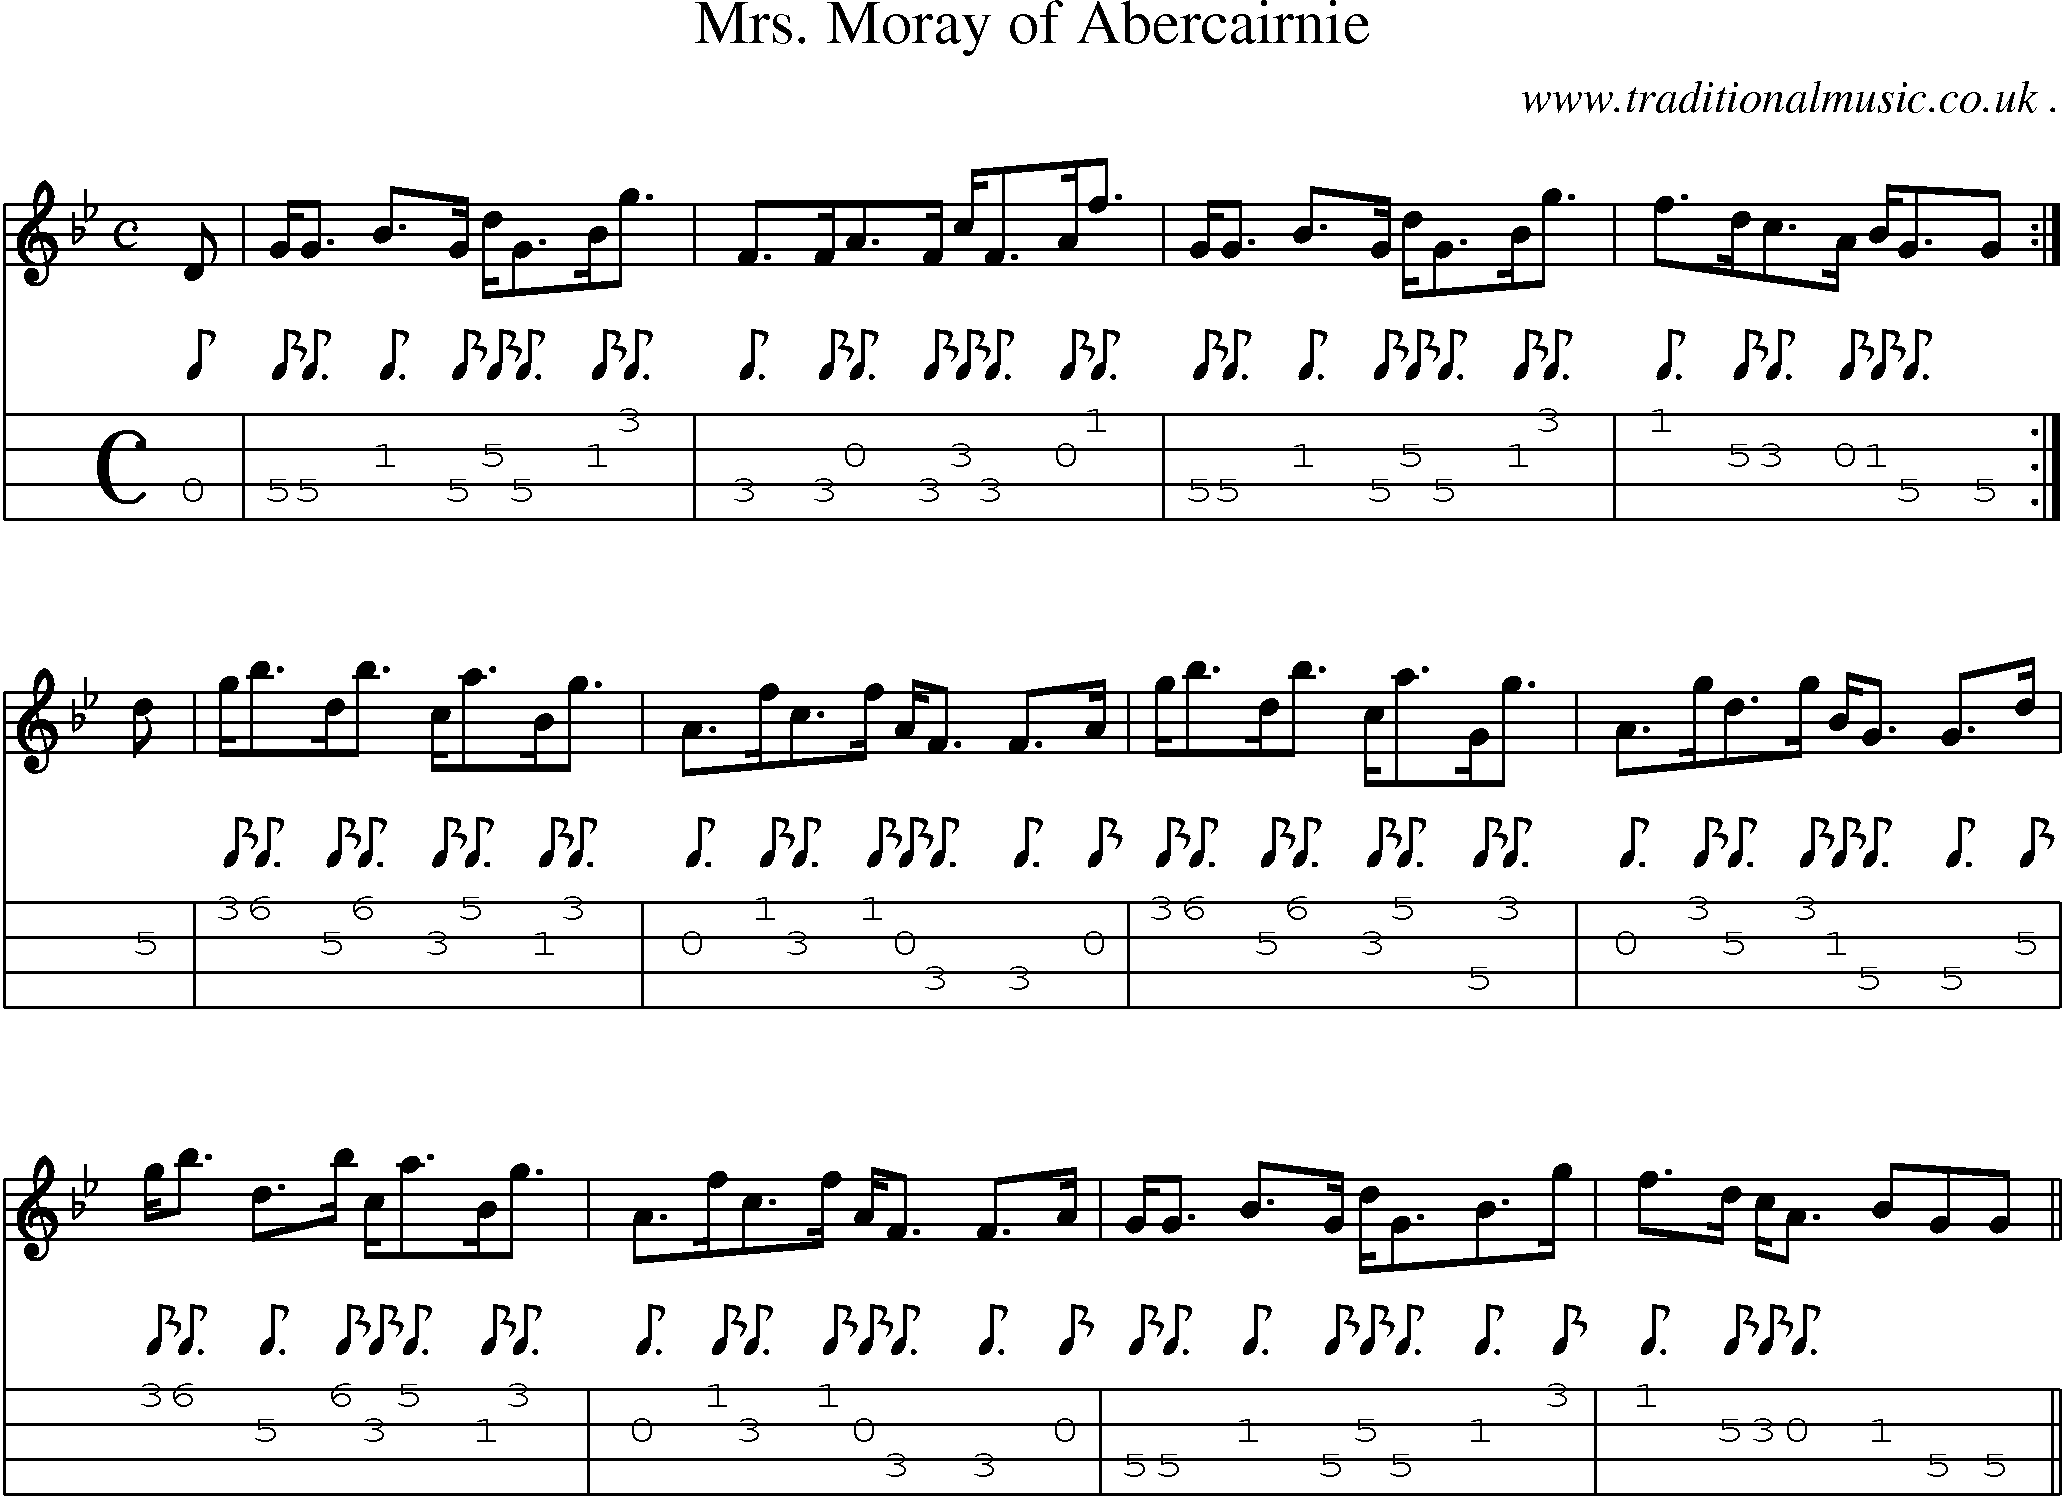 Sheet-music  score, Chords and Mandolin Tabs for Mrs Moray Of Abercairnie